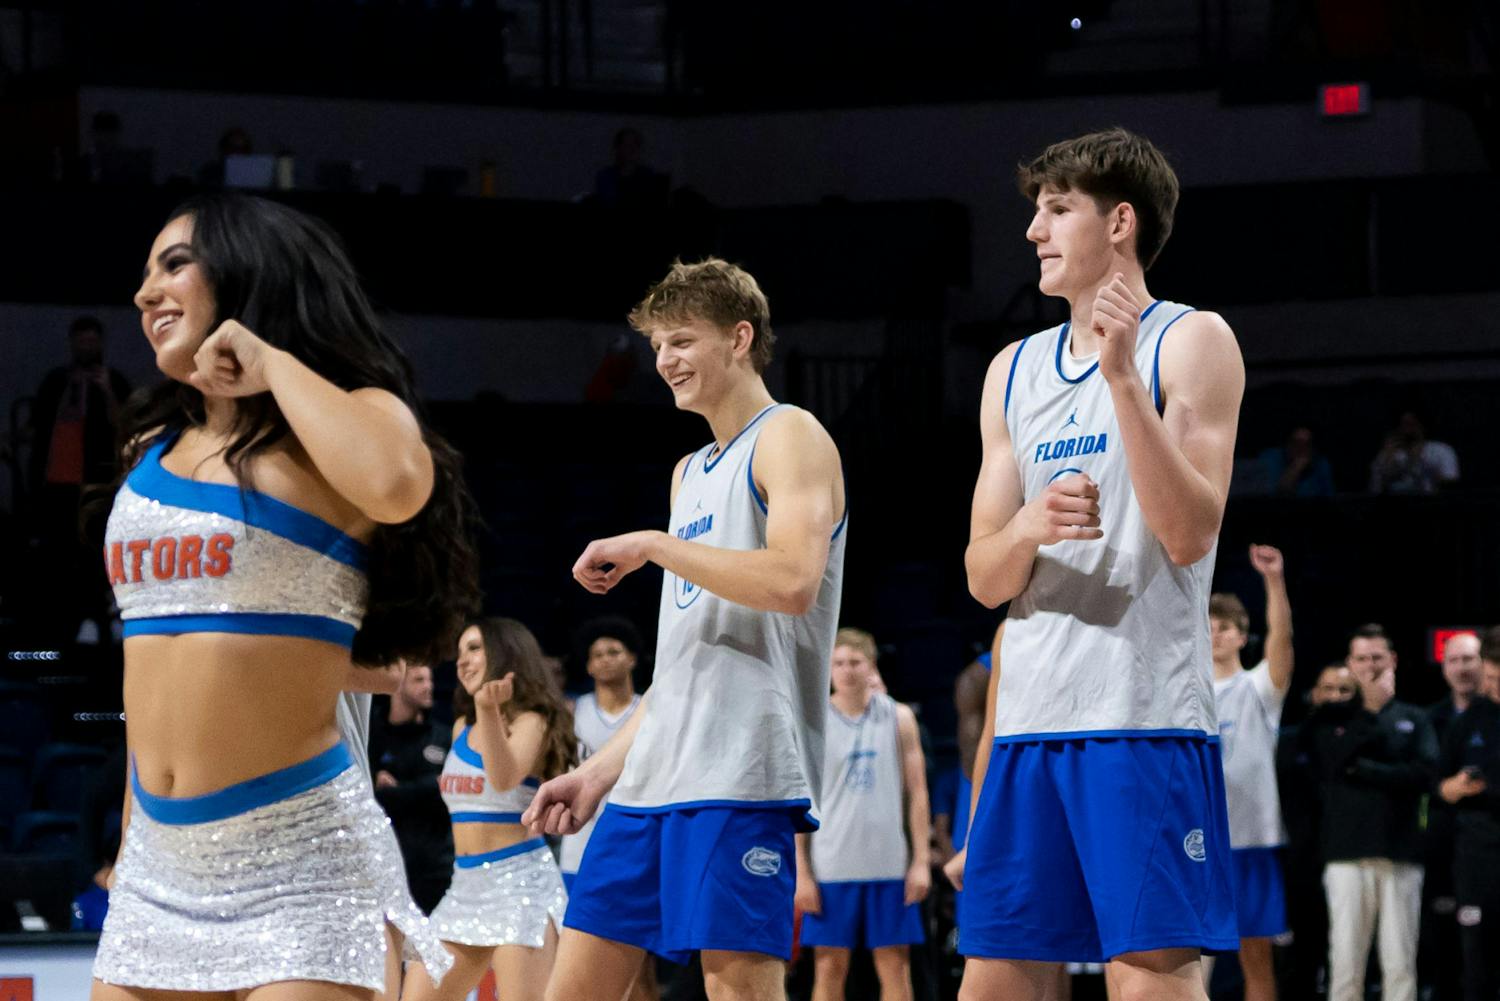 Alex Condon and Thomas Haugh dance with the Gator Dazzlers during the Orange & Blue Scrimmage in the Exactech Arena on Thursday, Nov. 2, 2023.